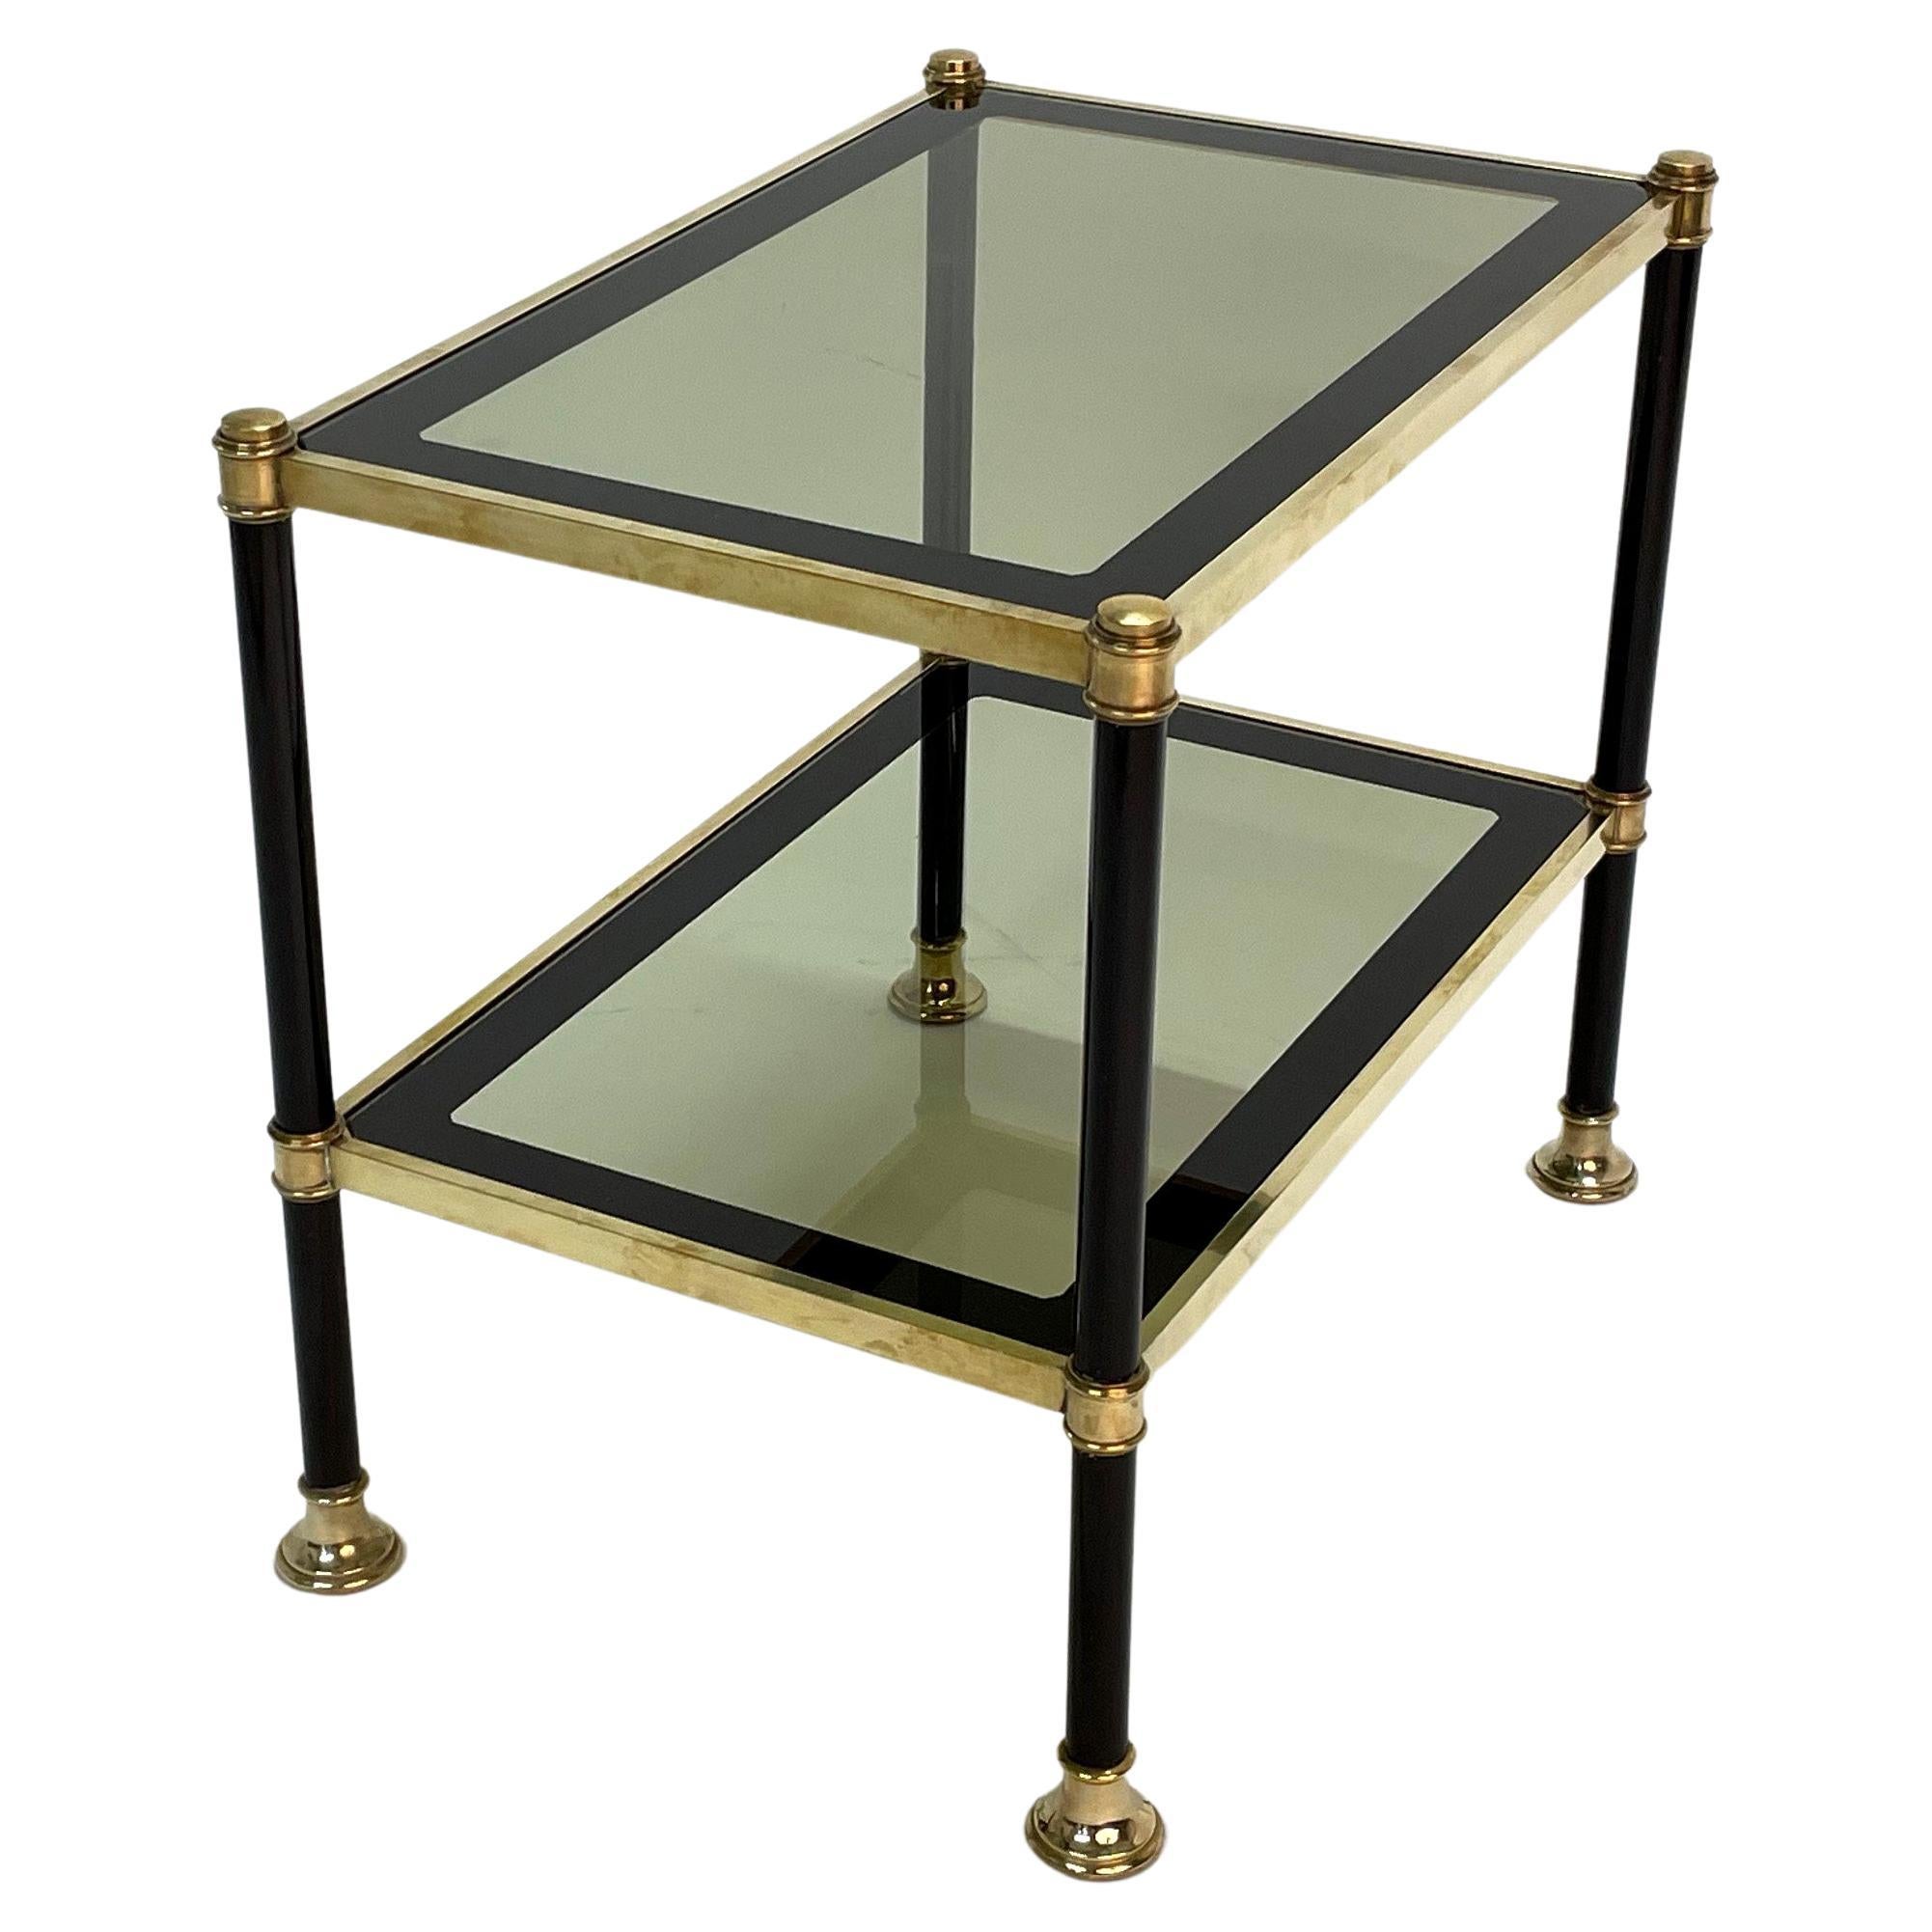 Amazing midcentury mirrored brass and smoked glass coffee table. This fantastic piece was designed in Italy during the 1970s and is attributed to the Maison Jansen. 

This two-tier mid-century rectangular coffee table is incredible as it comes